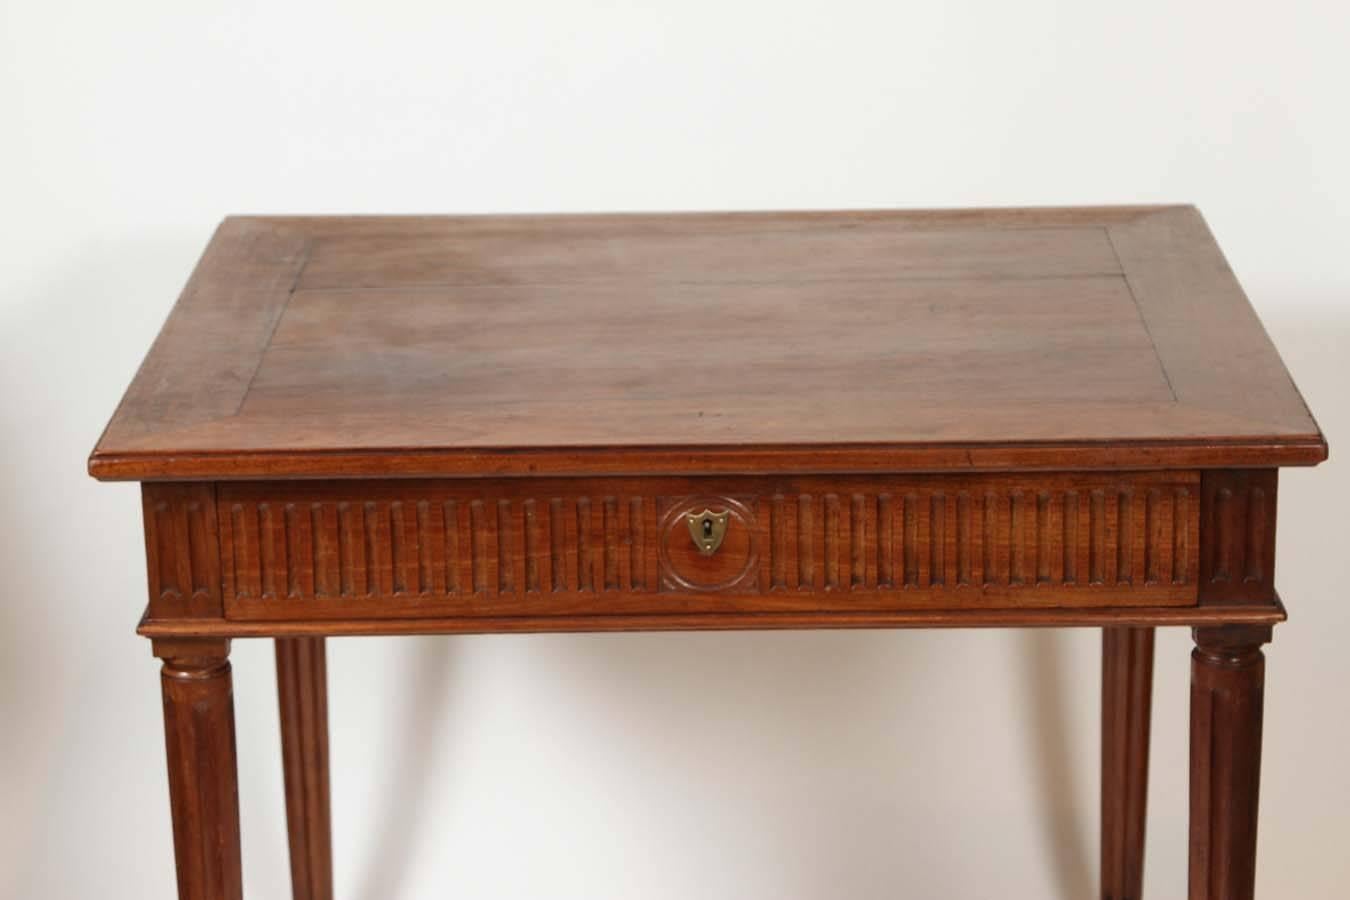 An Italian neoclassical walnut side table with a single fluted drawer on raised tapered legs, circa 1800.